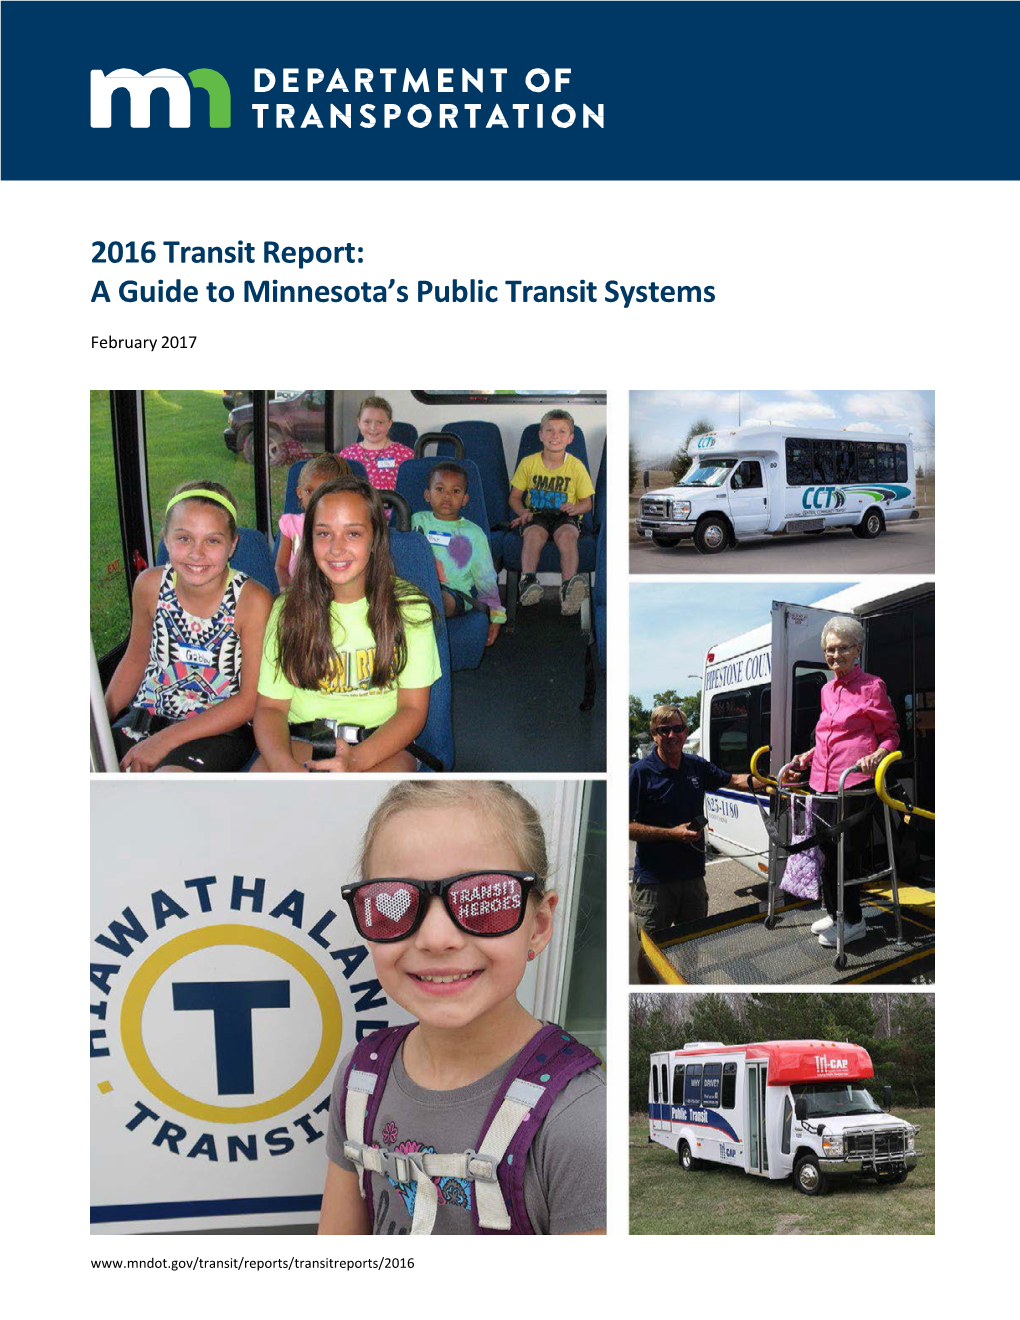 2016 Transit Report: a Guide to Minnesota's Public Transit Systems